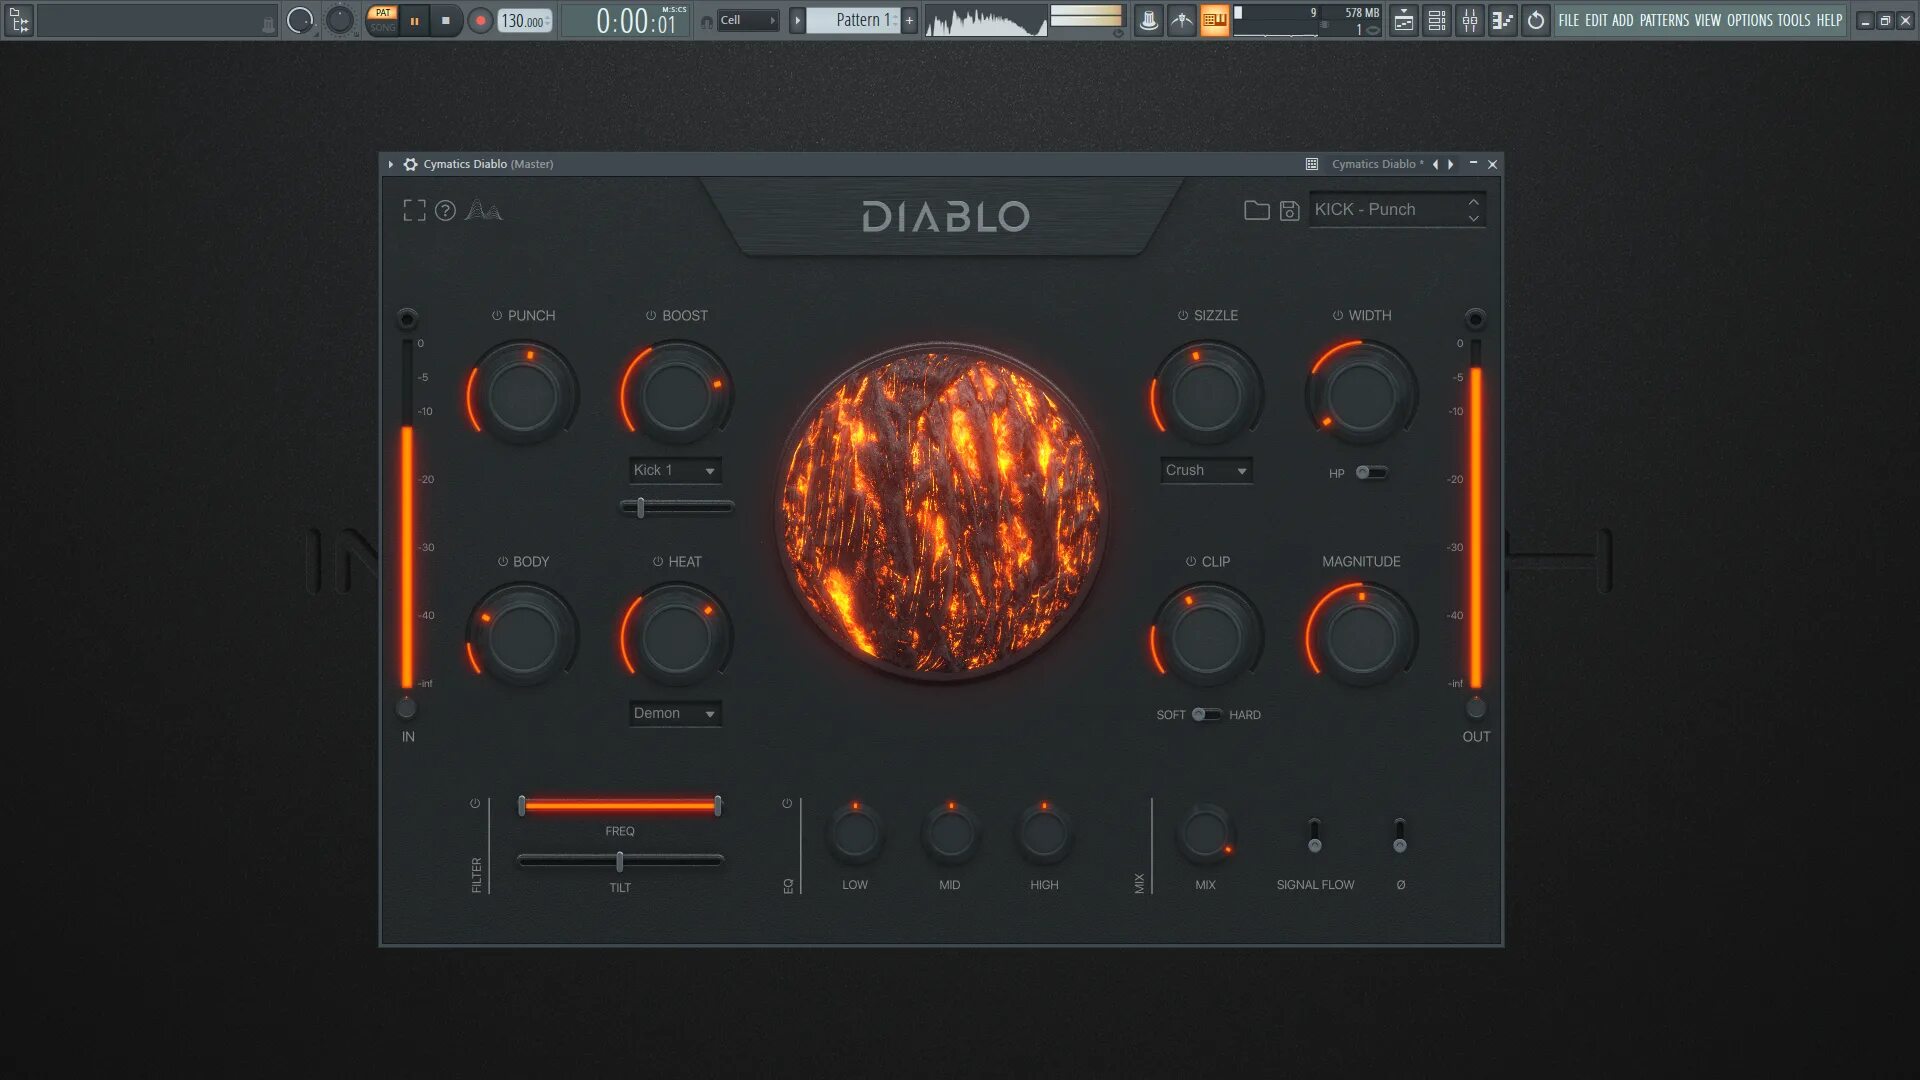 Cymatics VST collection 05.2021 REPACK by Flare. Cymatics Diablo VST. Cymatics Pluto VST. Comet VST. Vst collection